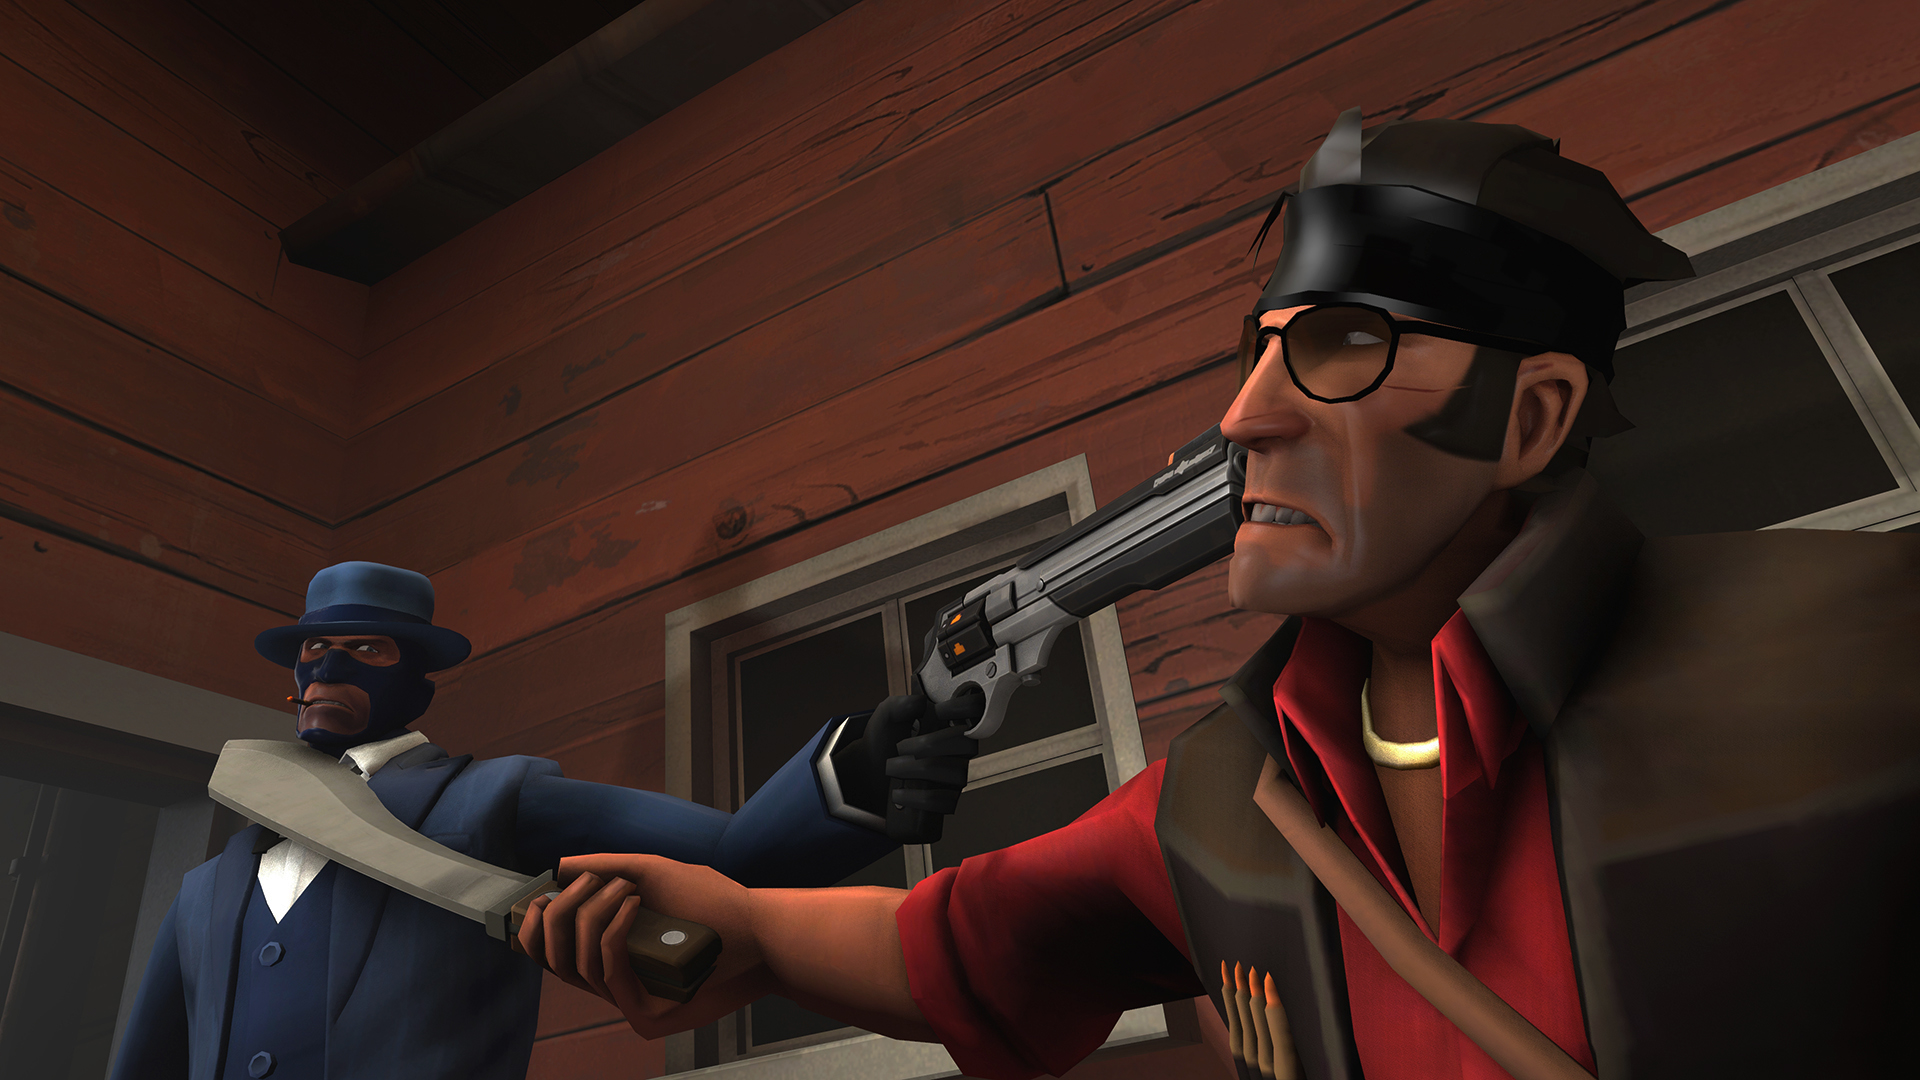 team fortress 2, video game, sniper (team fortress), spy (team fortress), team fortress